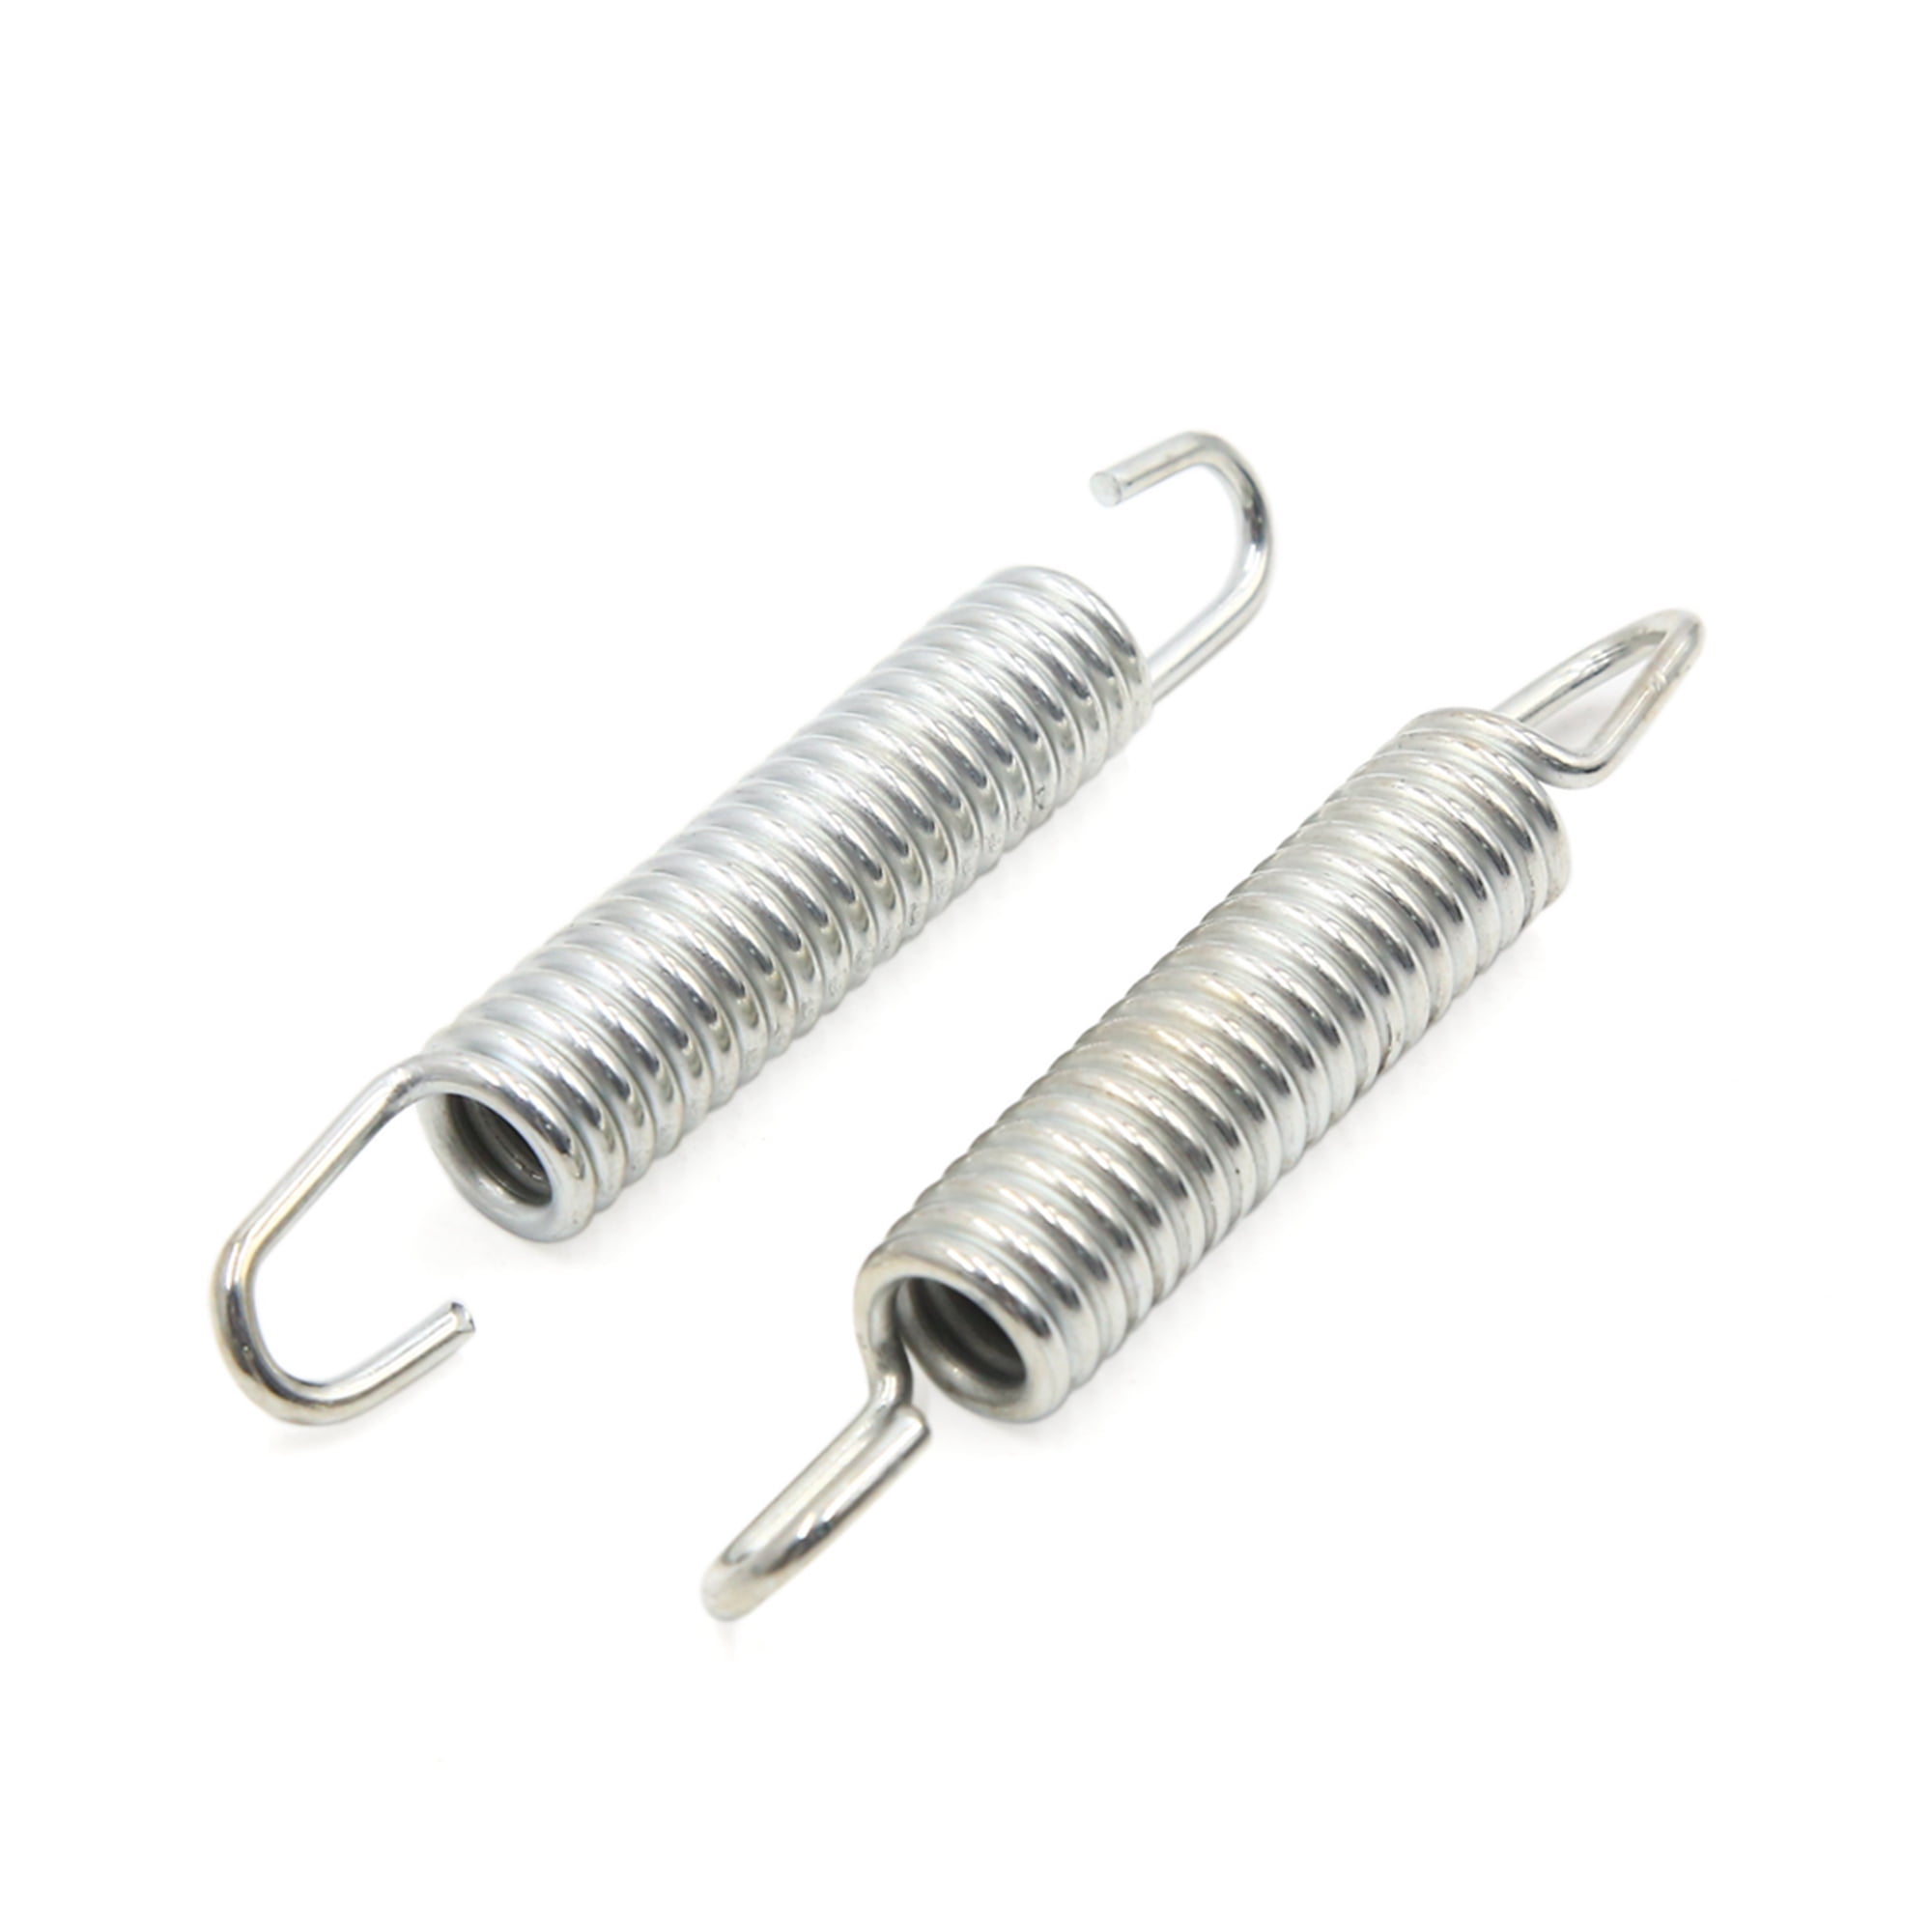 Sourcingmap 2pcs 10cm Length Silver Tone Metal Motorcycle Side Kickstand Spring for CG125 